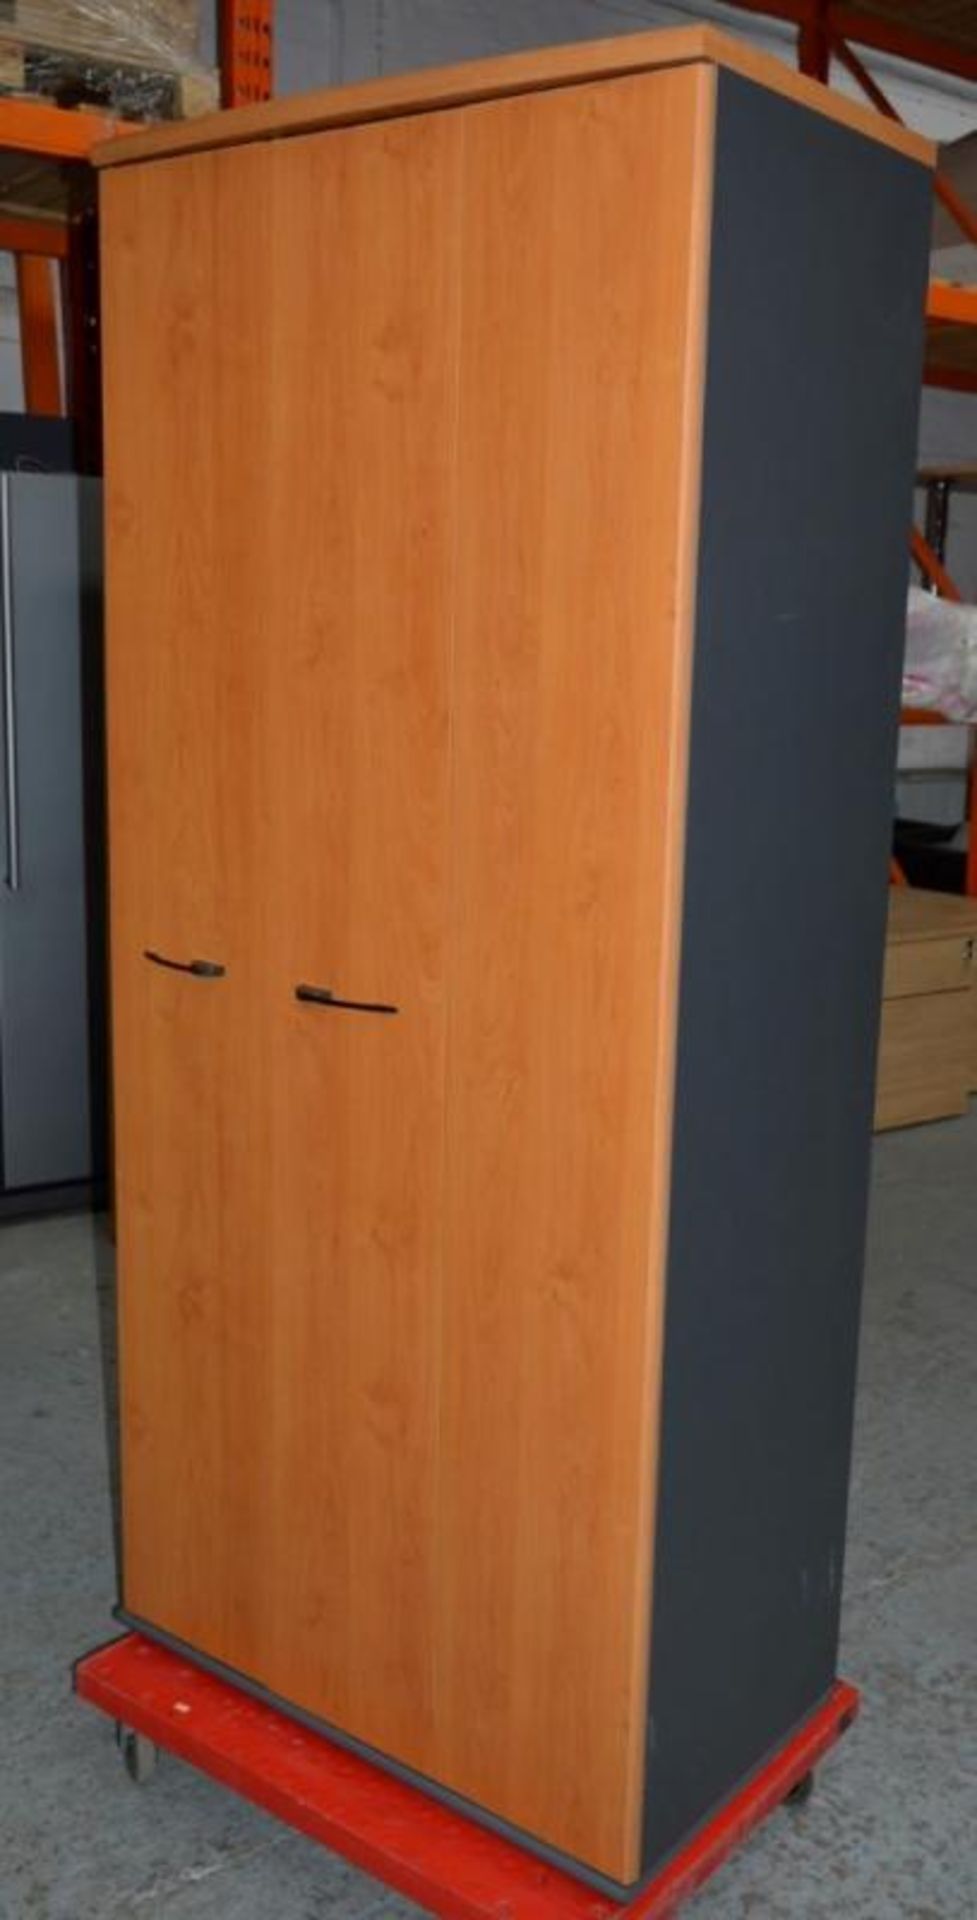 1 x Tall Upright Office Storage Cabinet - Dark Grey Unit With Cherry Wood Folding Doors - Five Tier - Image 2 of 3